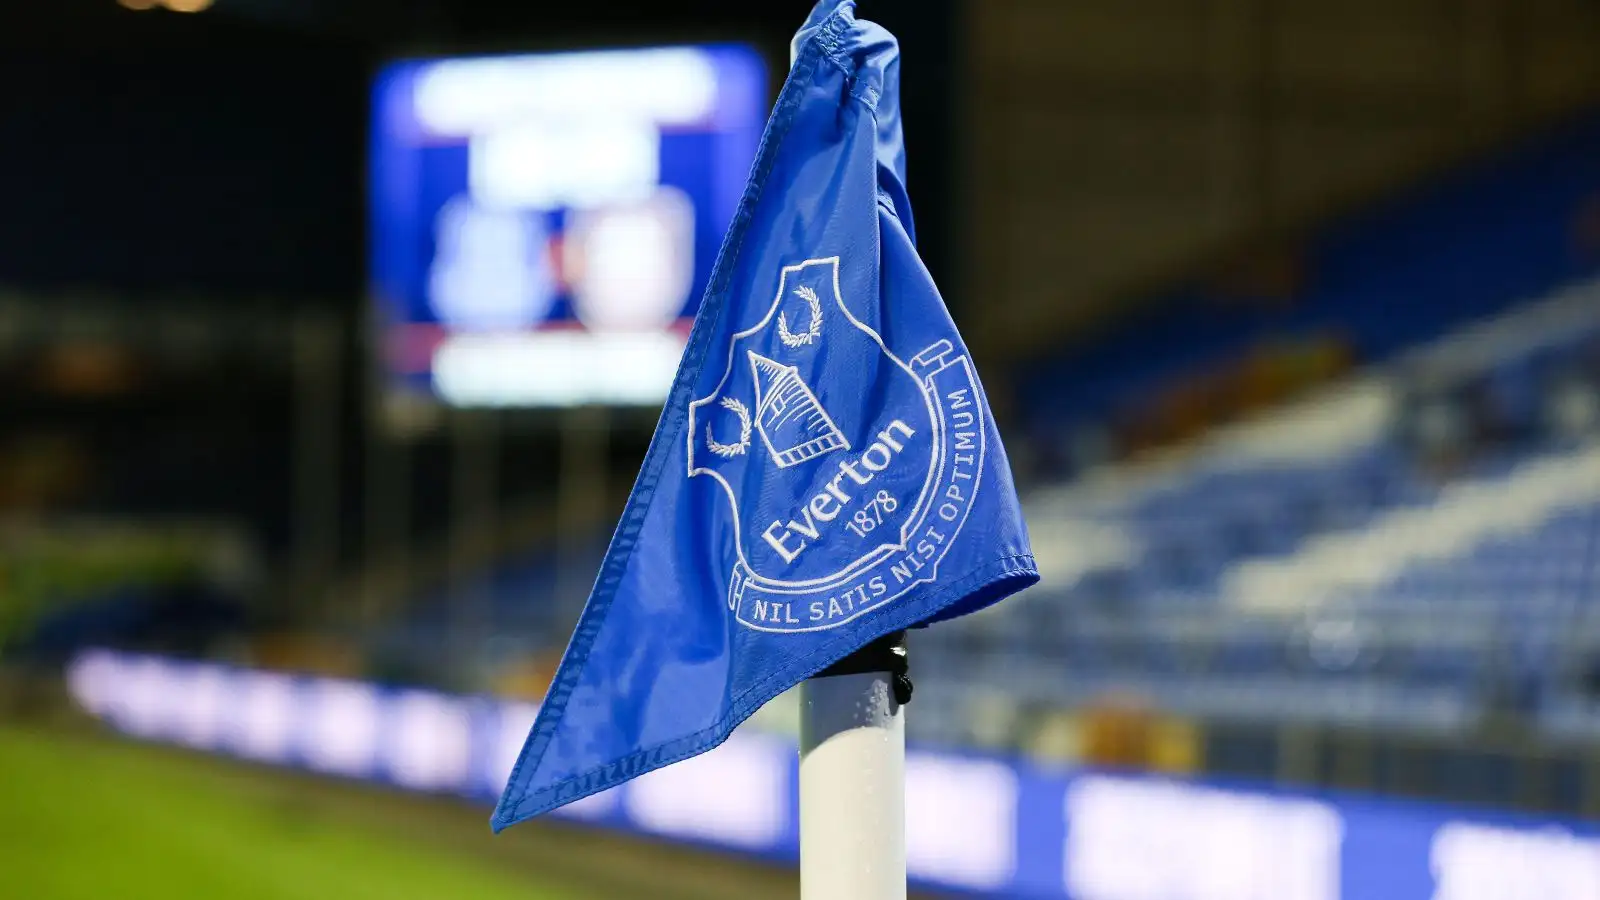 Everton given deduction